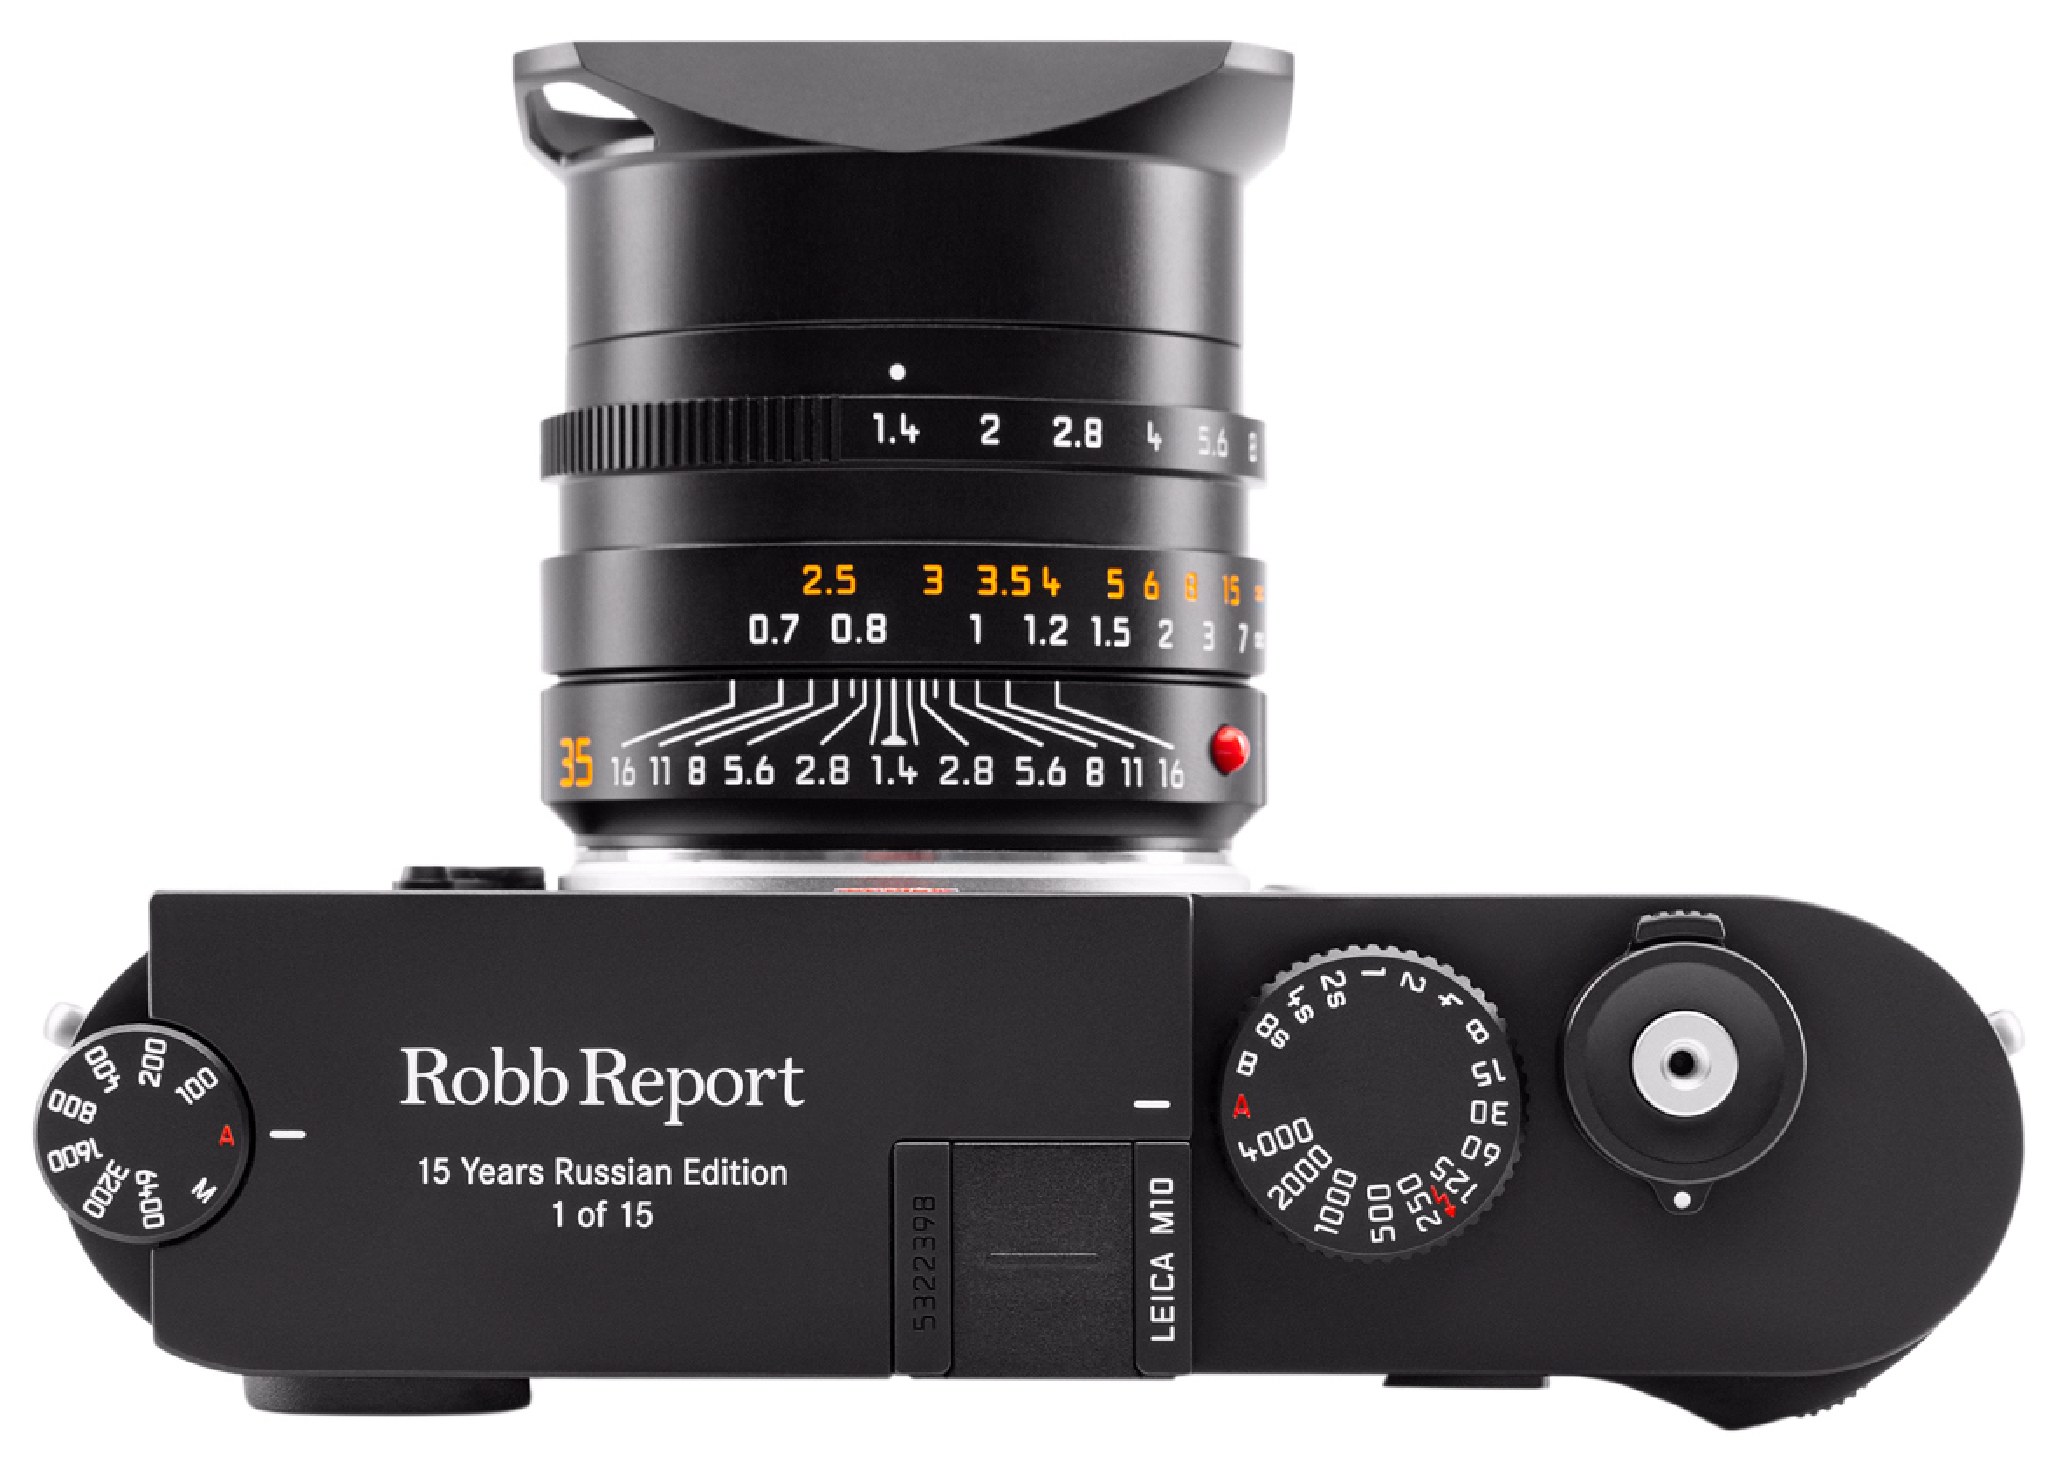 Leica-M10-Robb-Report-Russia-15-years-limited-edition-camera-5.jpg